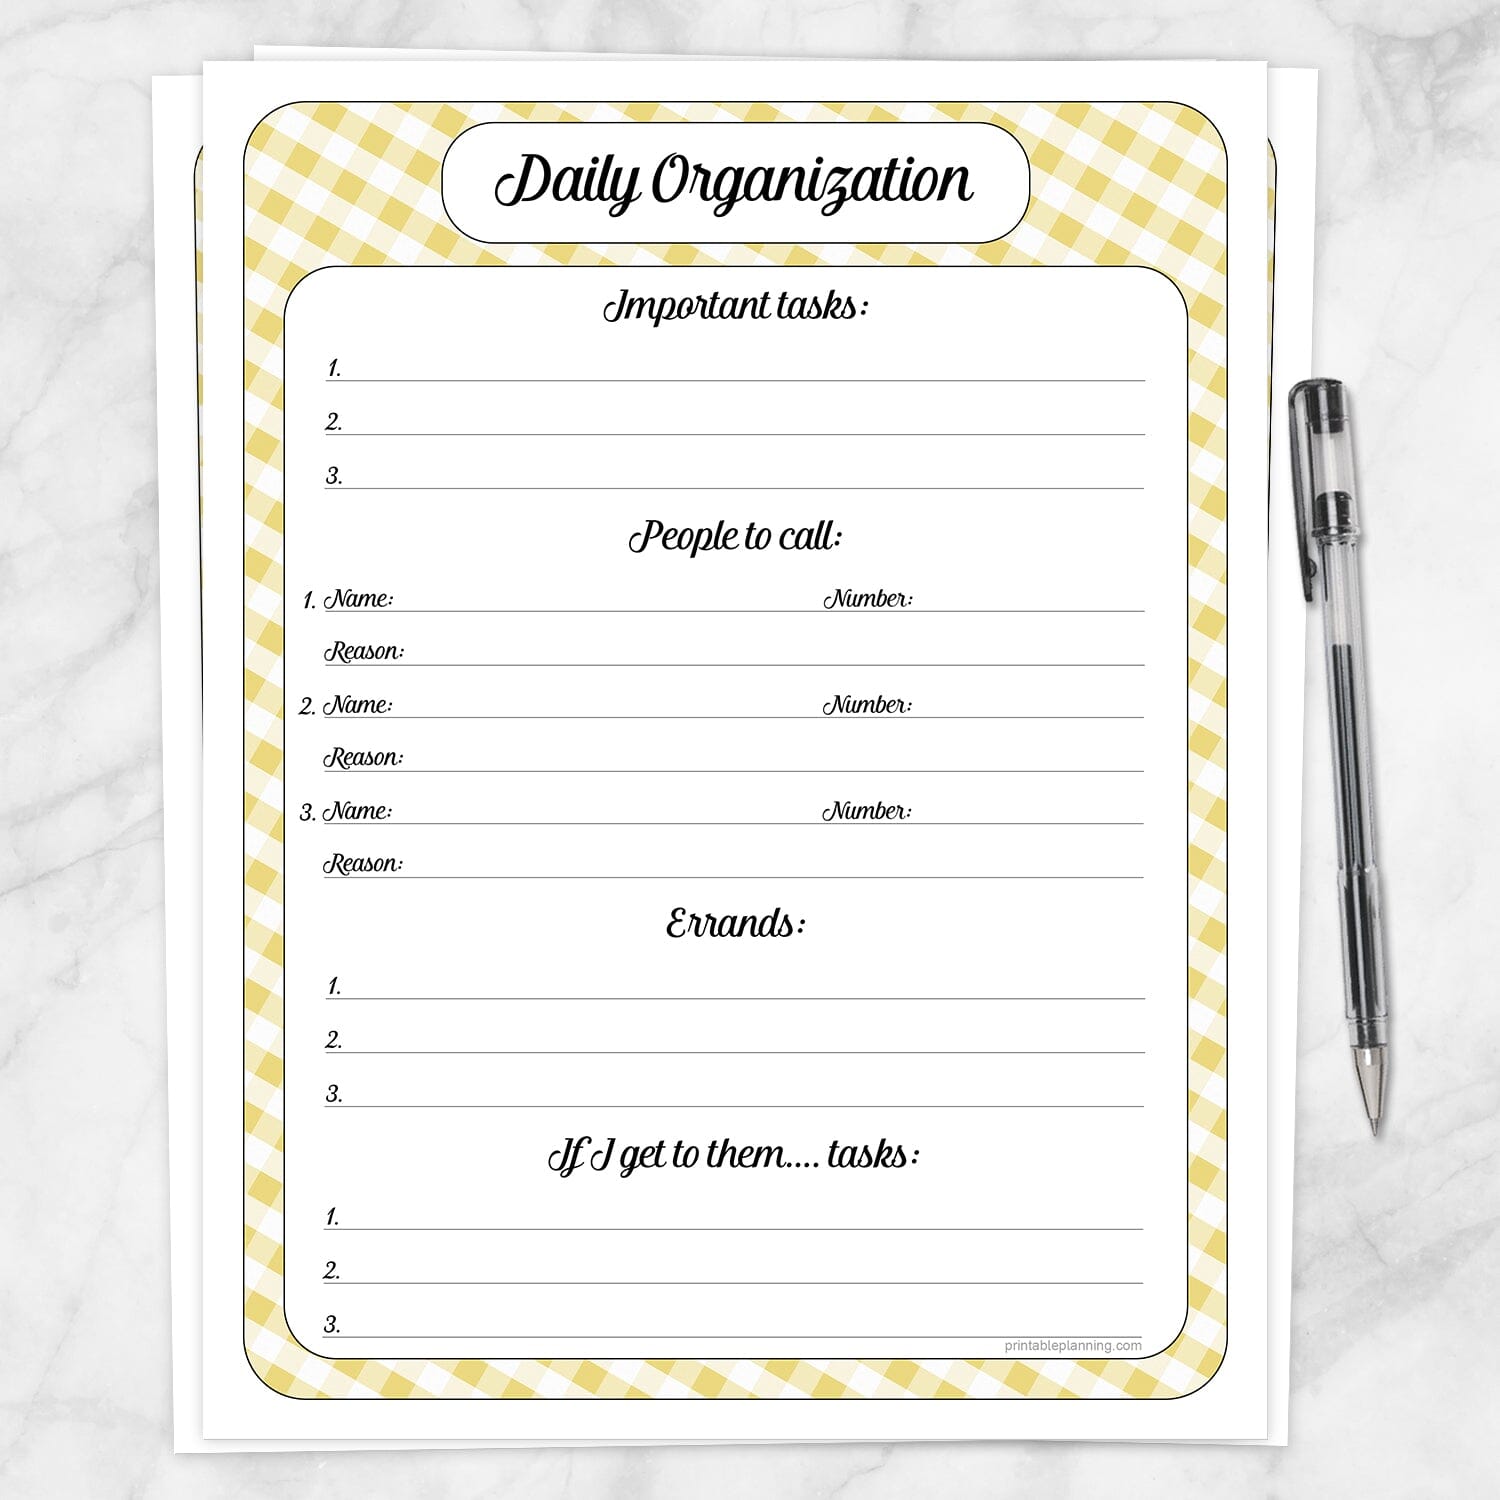 Printable Yellow Gingham Daily Organization Category Task Sheet at Printable Planning.